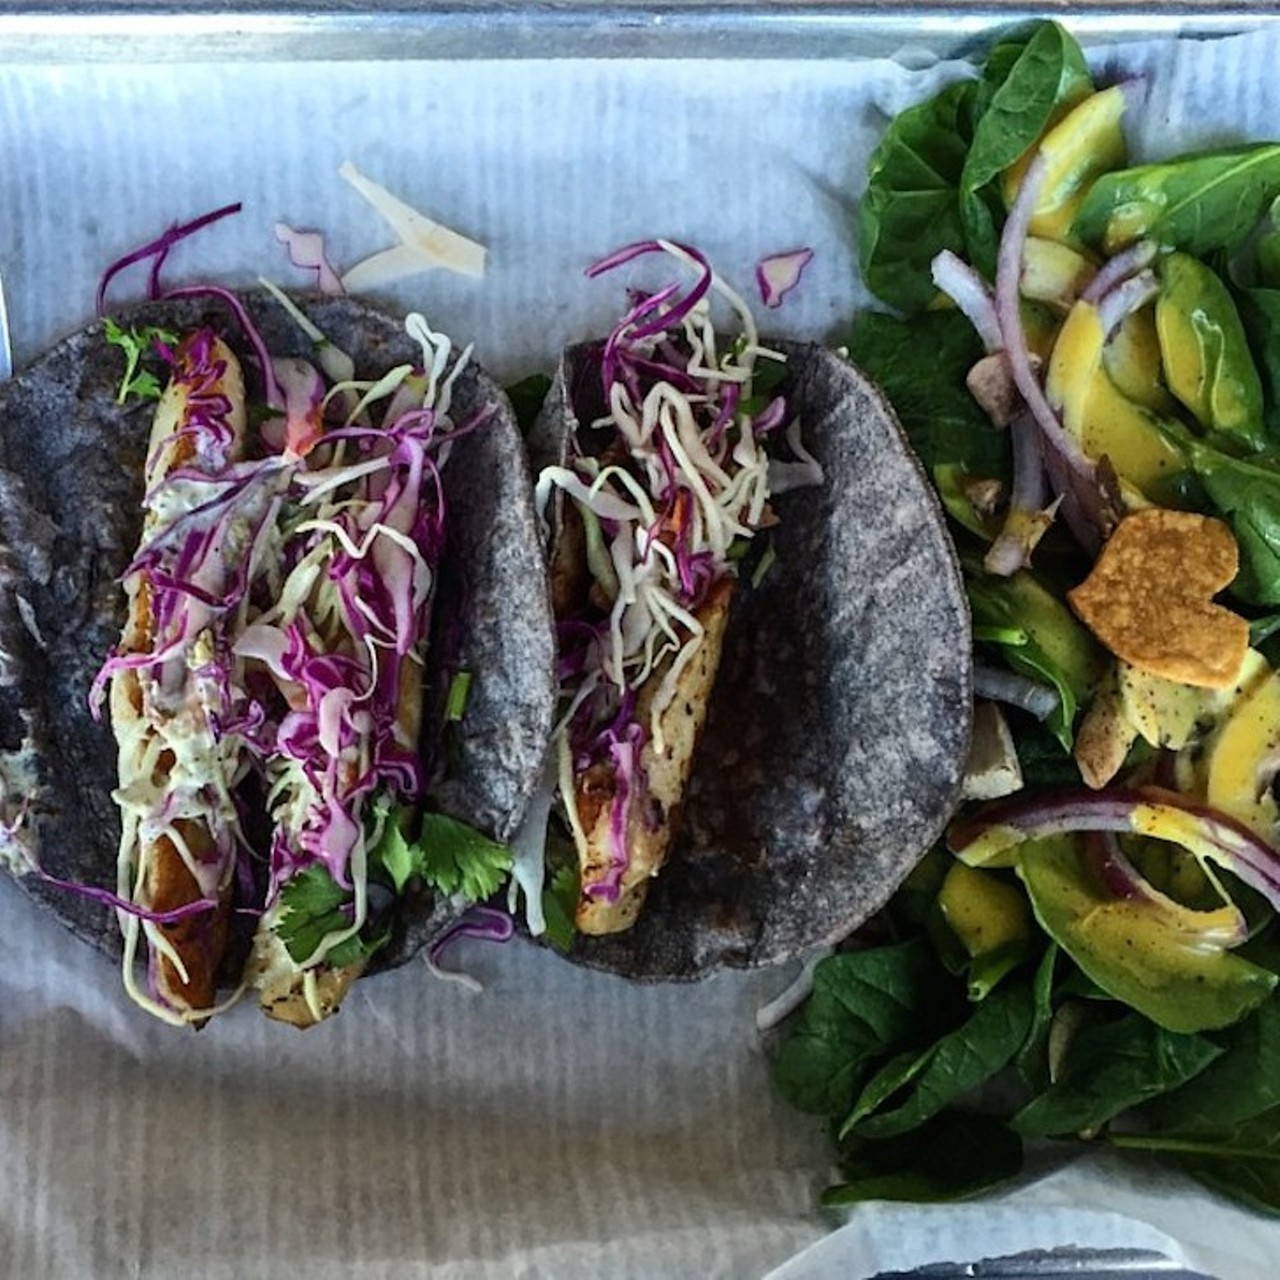 The Cove
606 W. Cypress St., (210) 227-2683, thecove.us
Bring the whole family to the Cove, a kid-friendly venue with organic noms and live music, while you sip on a beer and devour a couple fish tacos with your better half. 
Photo via Instagram (twentysomethingsa)